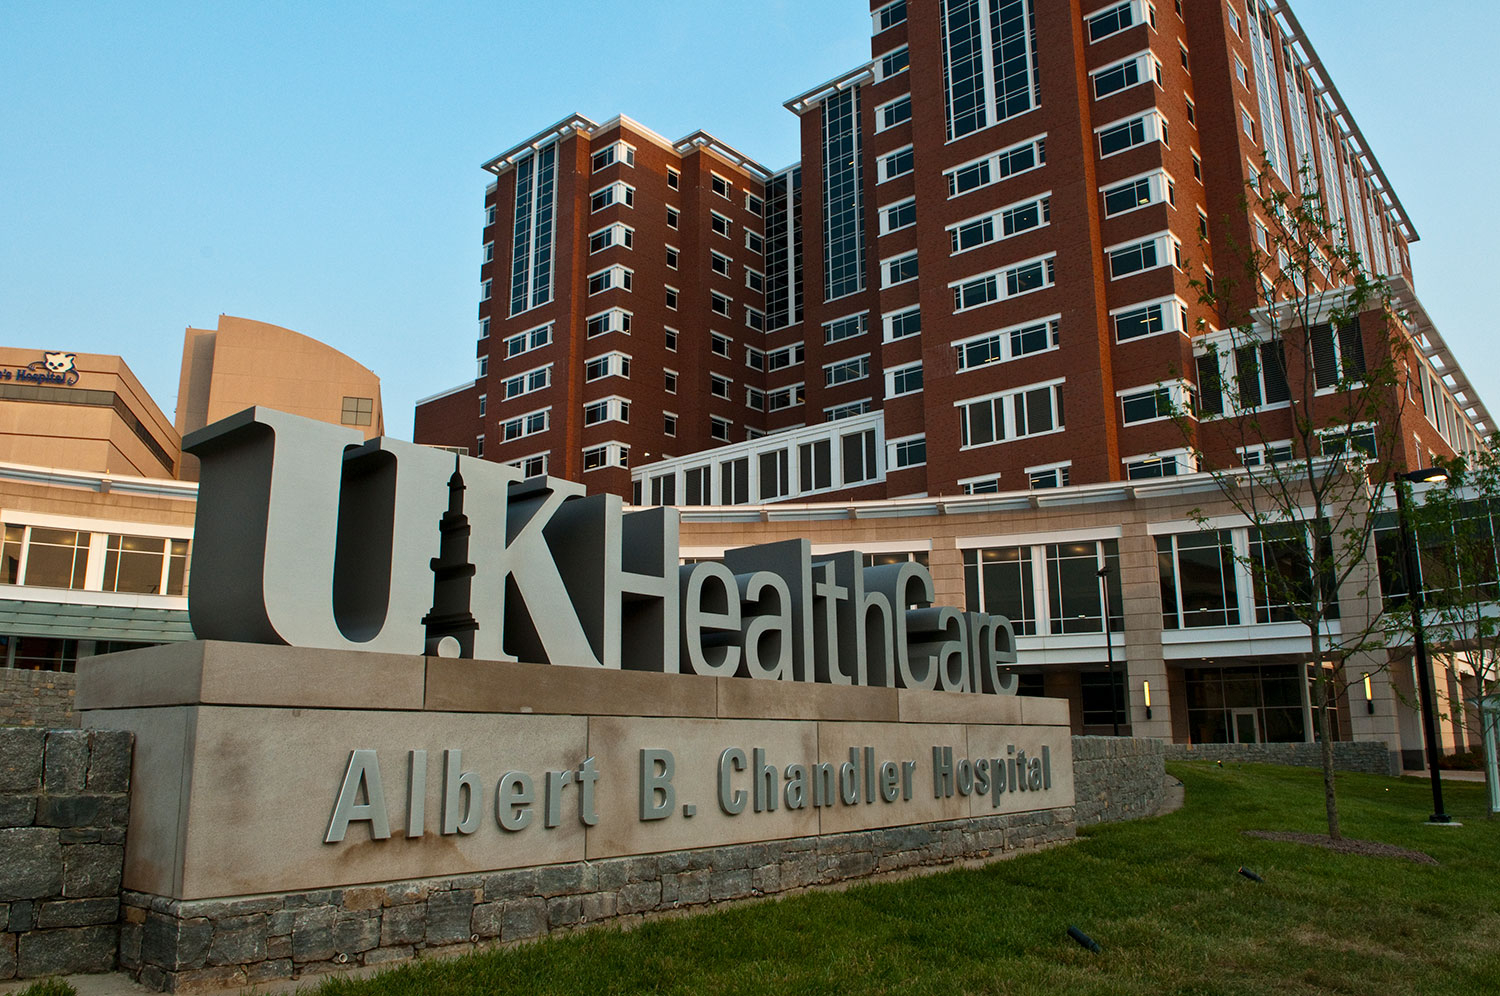 UK HealthCare Albert B. Chandler Hospital sign with building in background